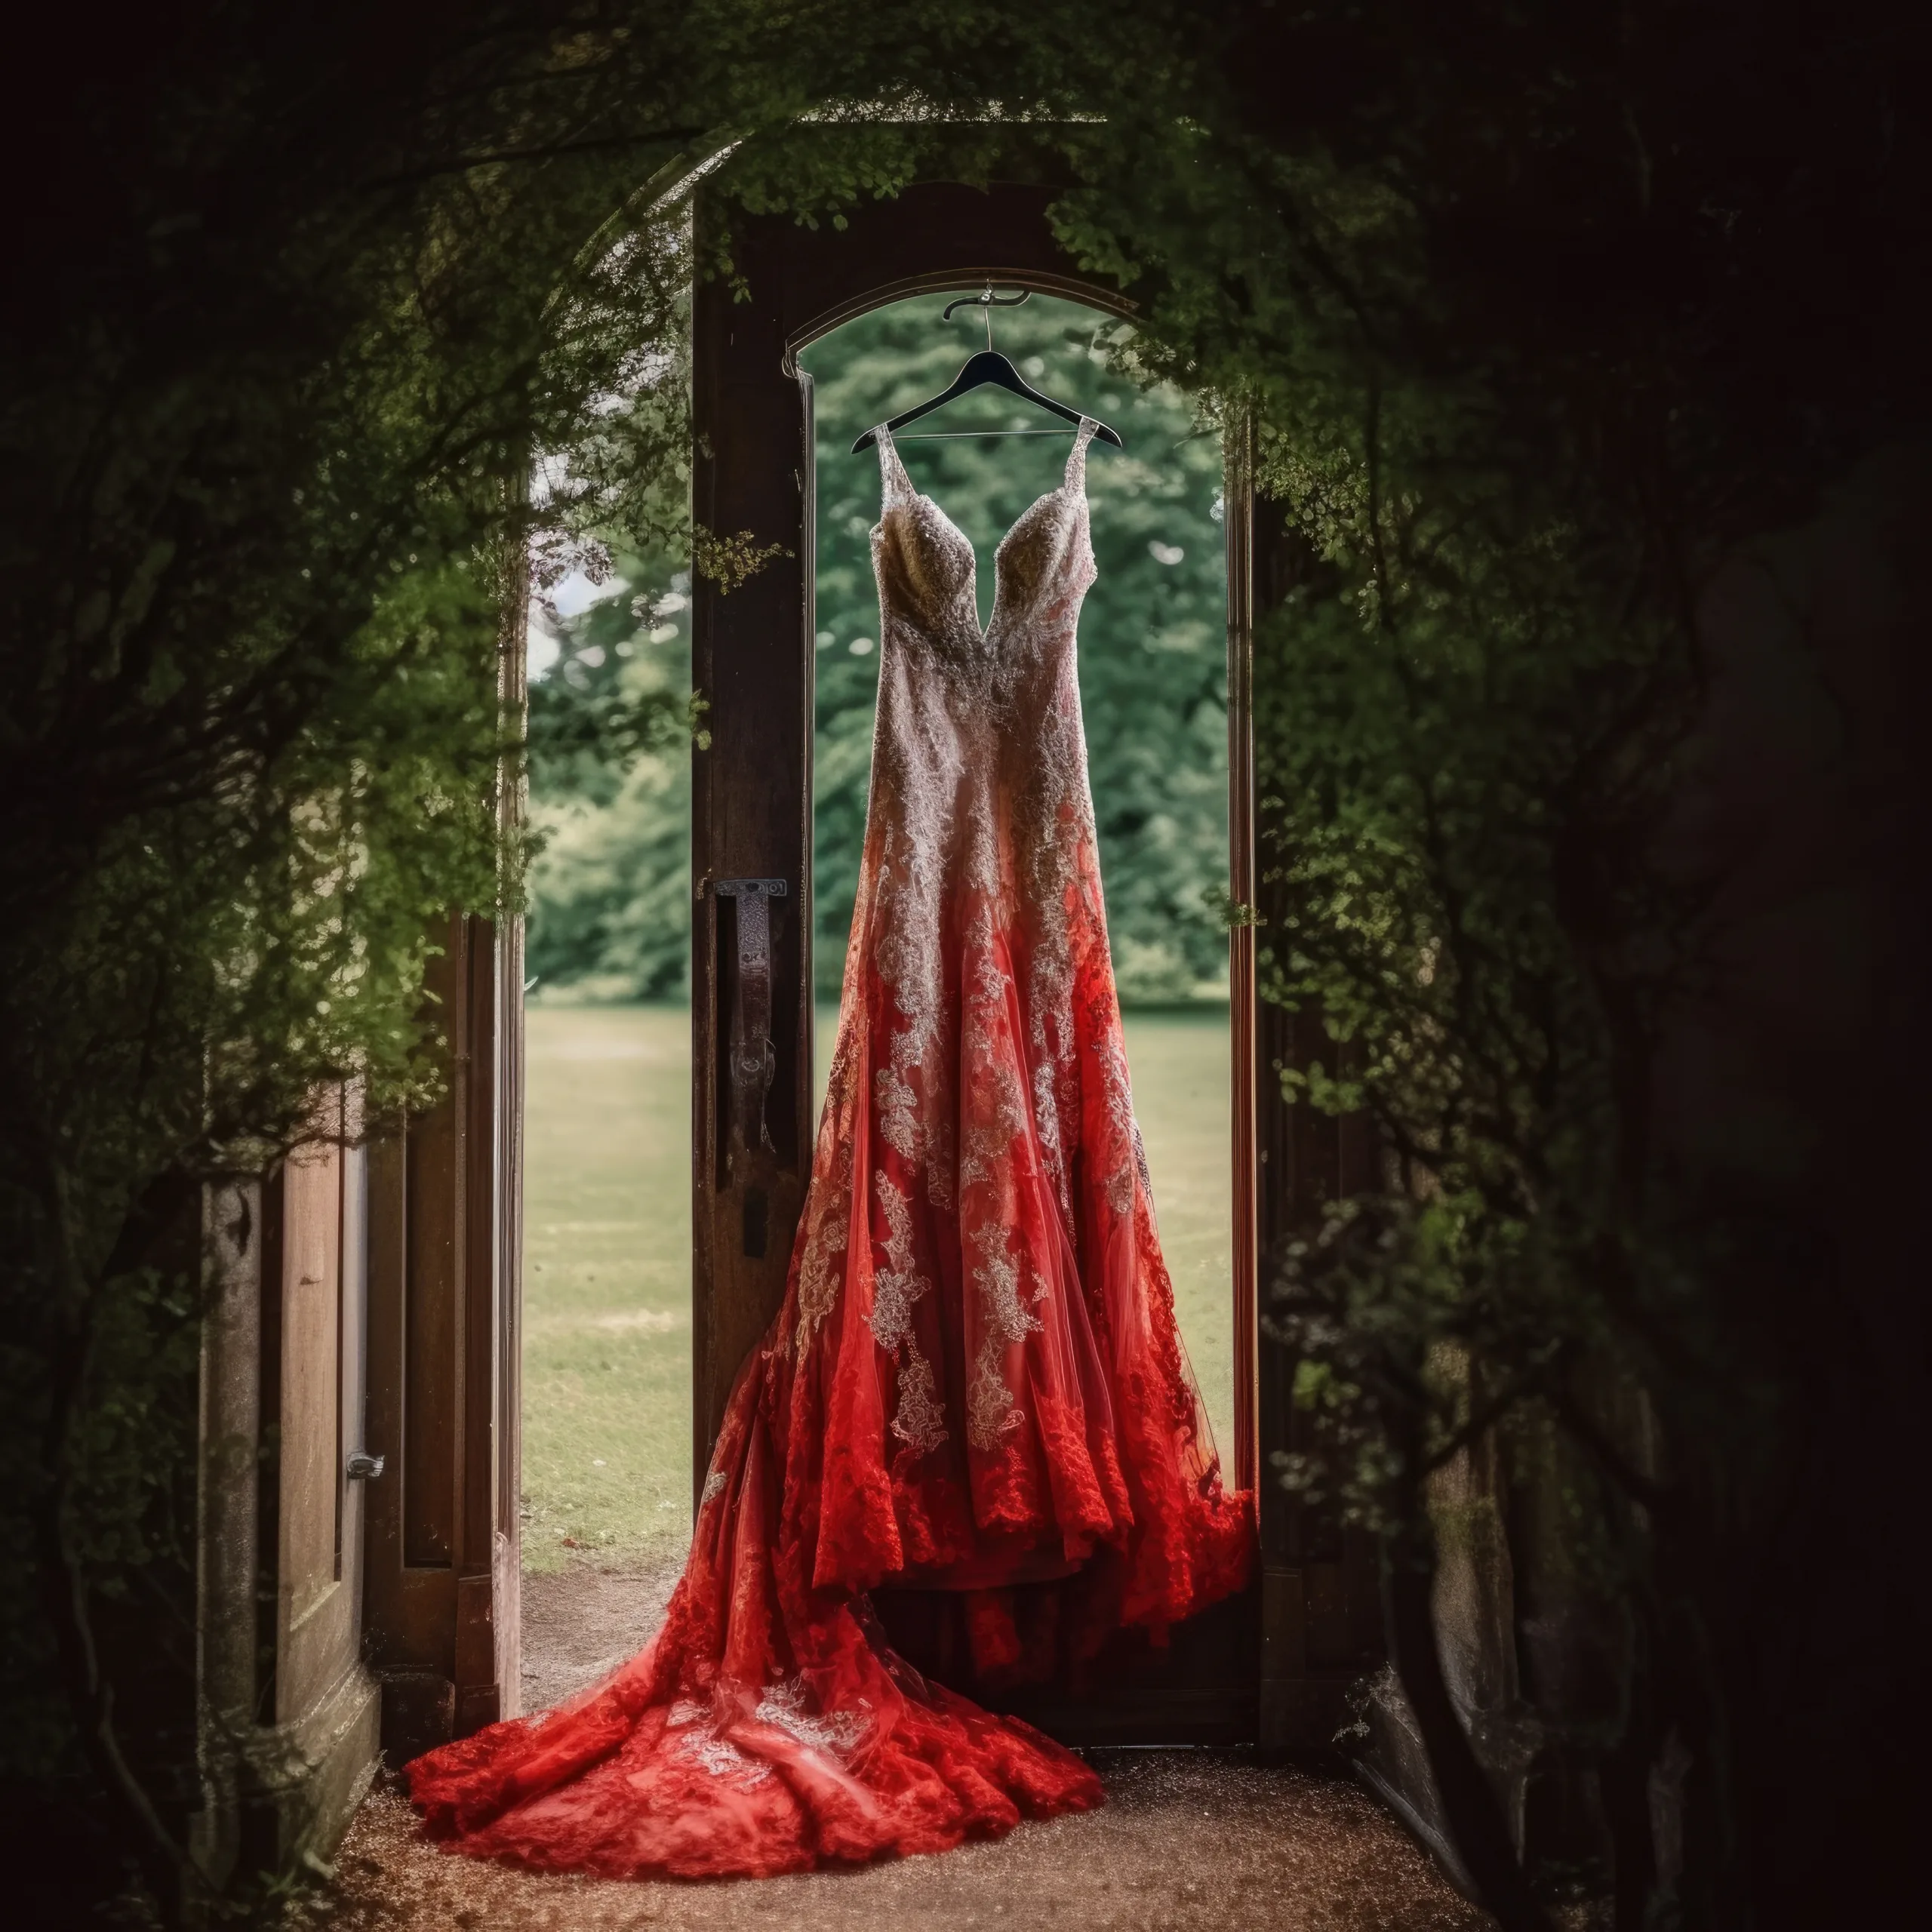 Pear tree at Purton<br />
Photographing The wedding gown draped over a doorway.